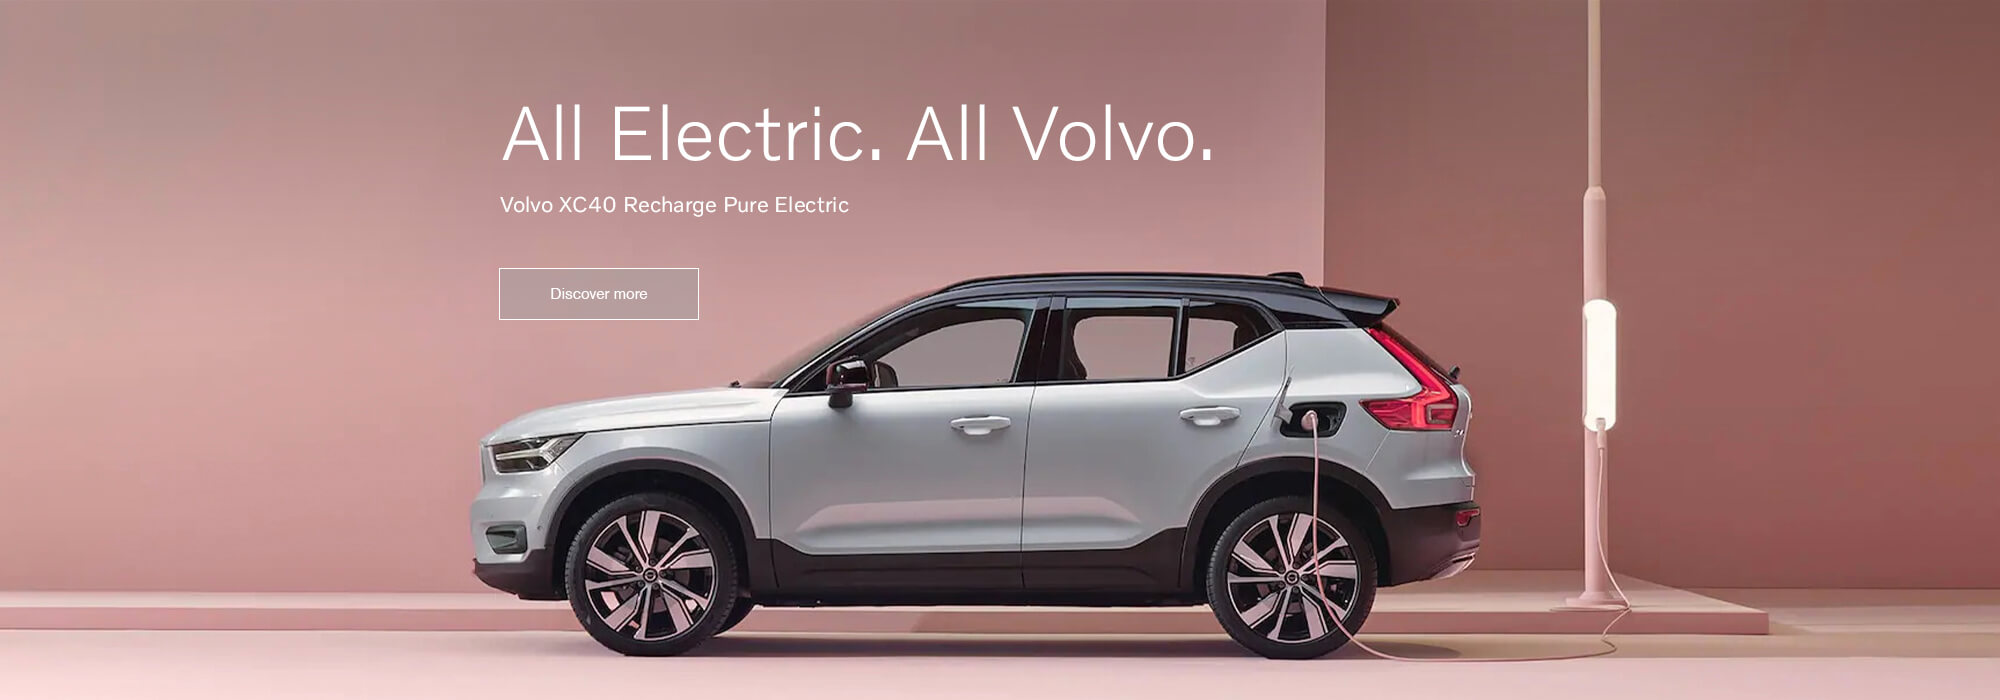 All Electric. All Volvo. The Volvo XC40 Recharge Pure Electric.